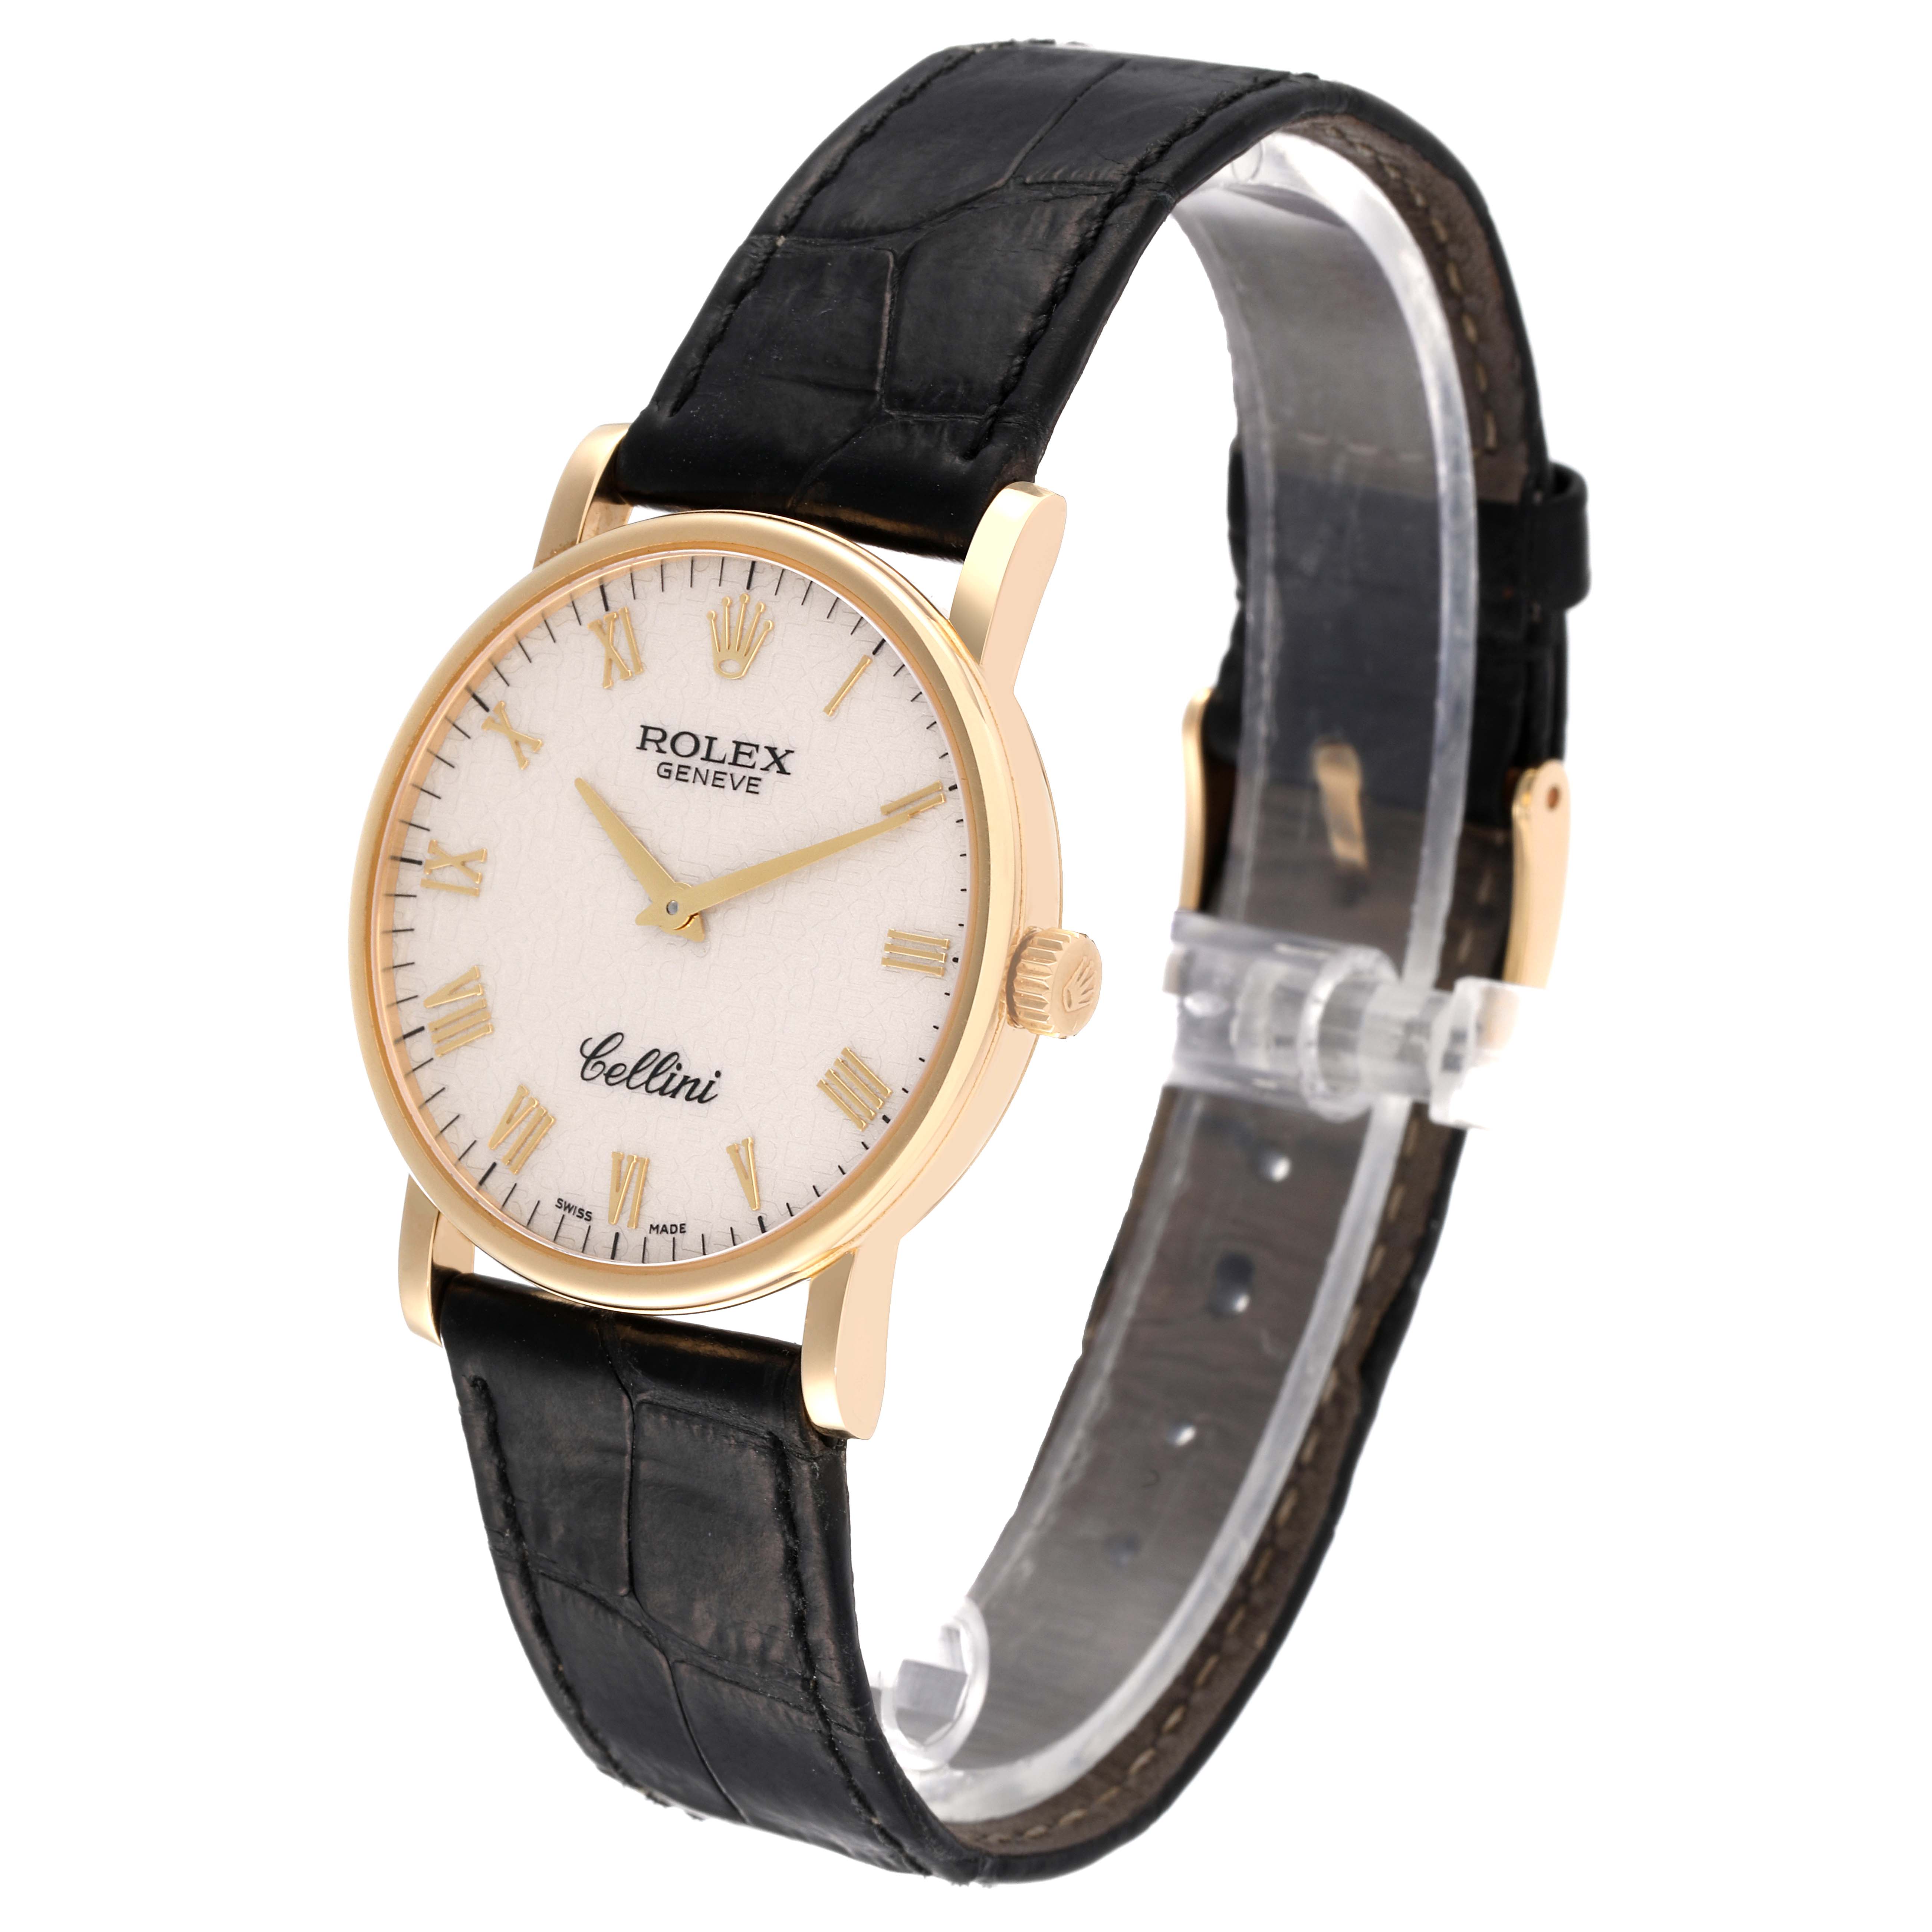 Rolex Cellini Classic Yellow Gold Anniversary Dial Watch 5115 Box ...